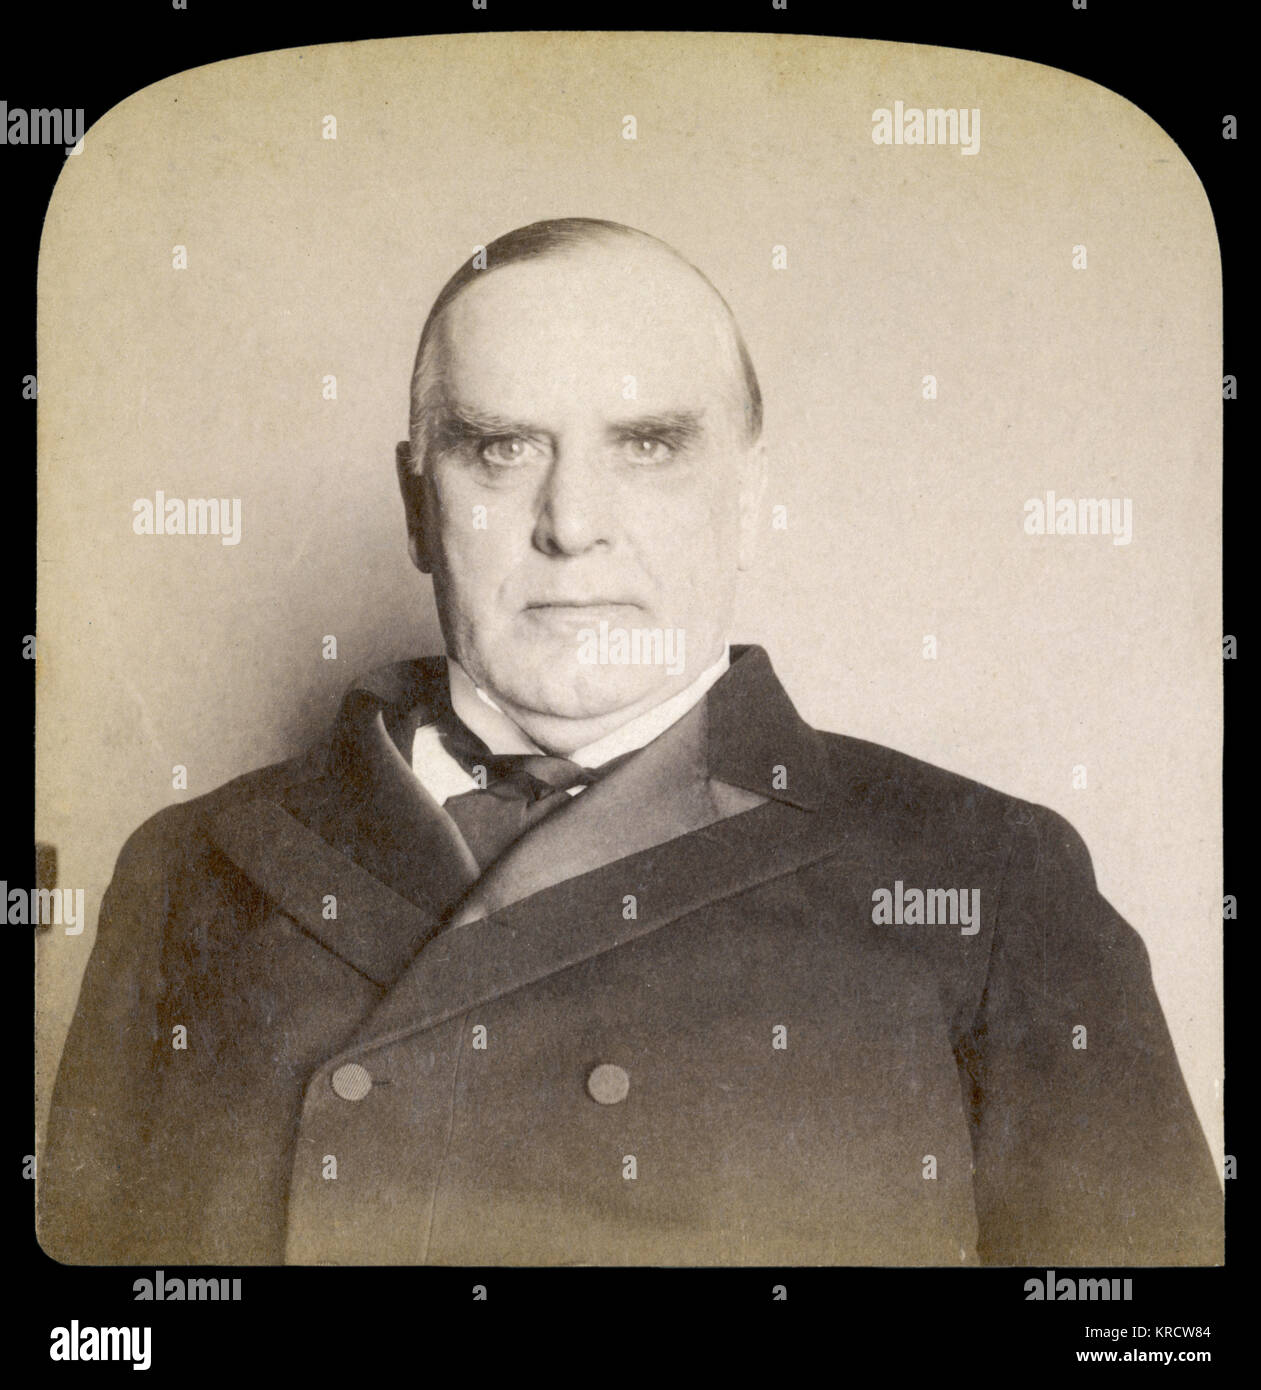 WILLIAM MCKINLEY 'The Martyred President' 25th President of the United States, assassinated in 1901. Date: 1843 - 1901 Stock Photo